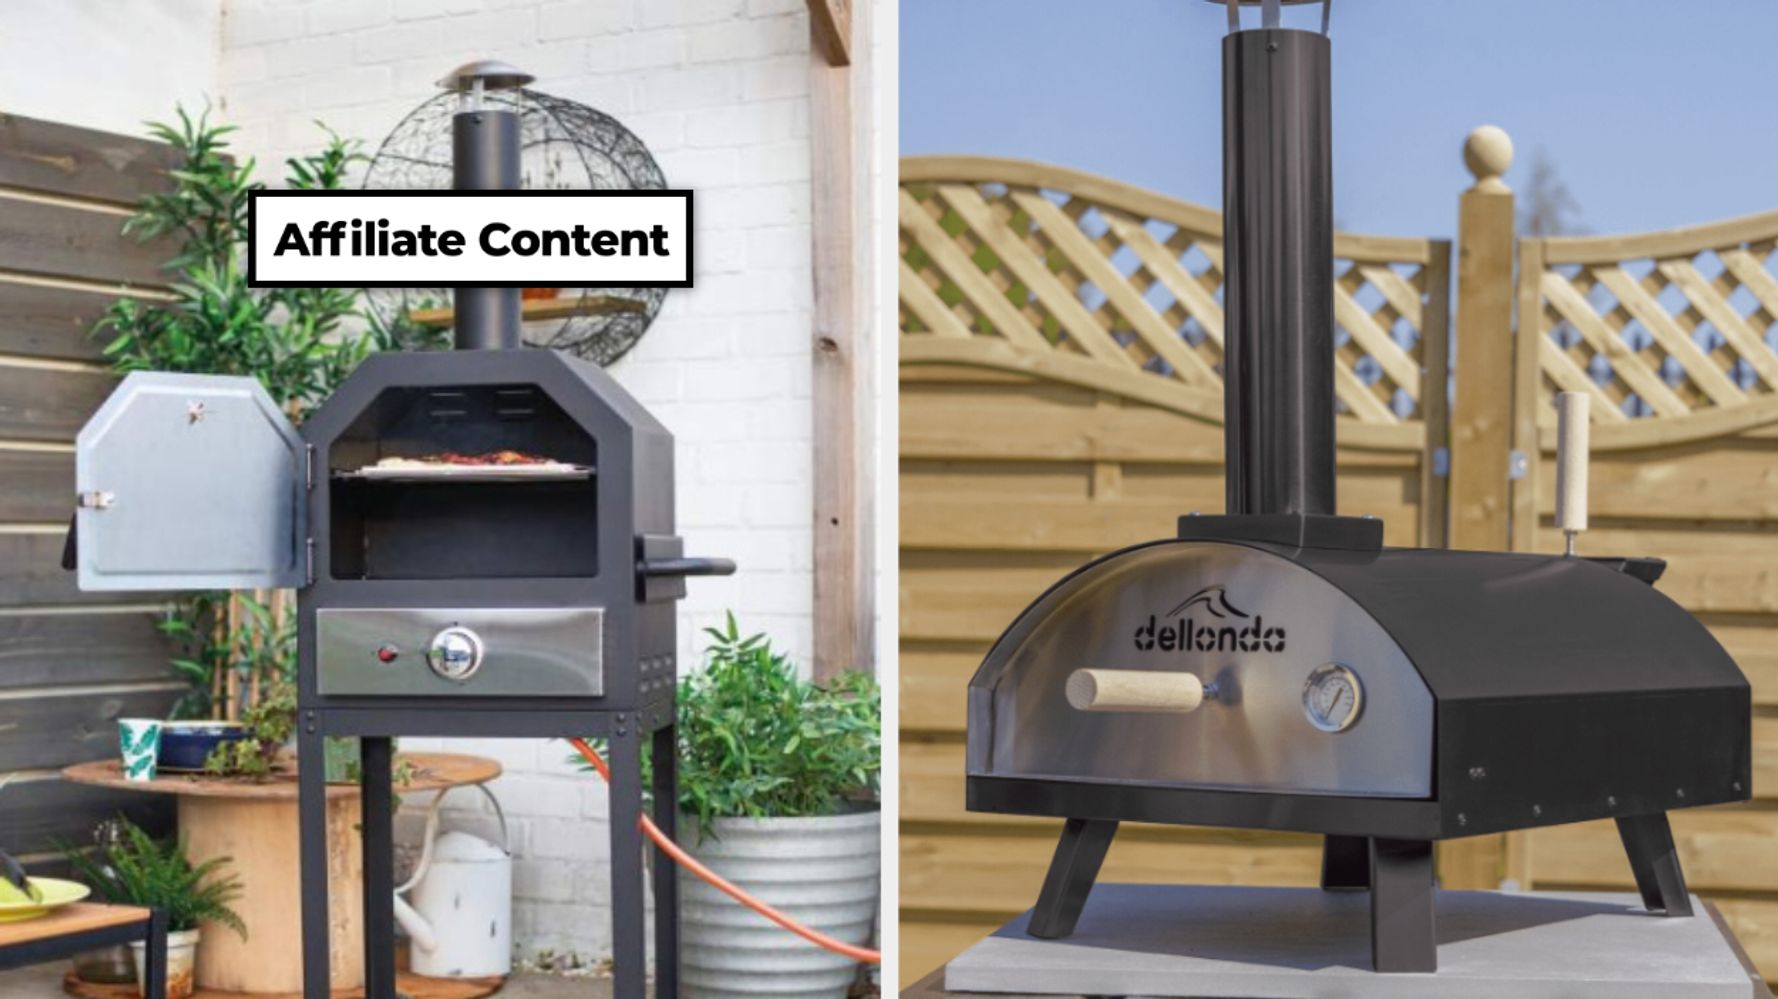 Aldi's BBQ pizza oven is back for 2023 at just £40